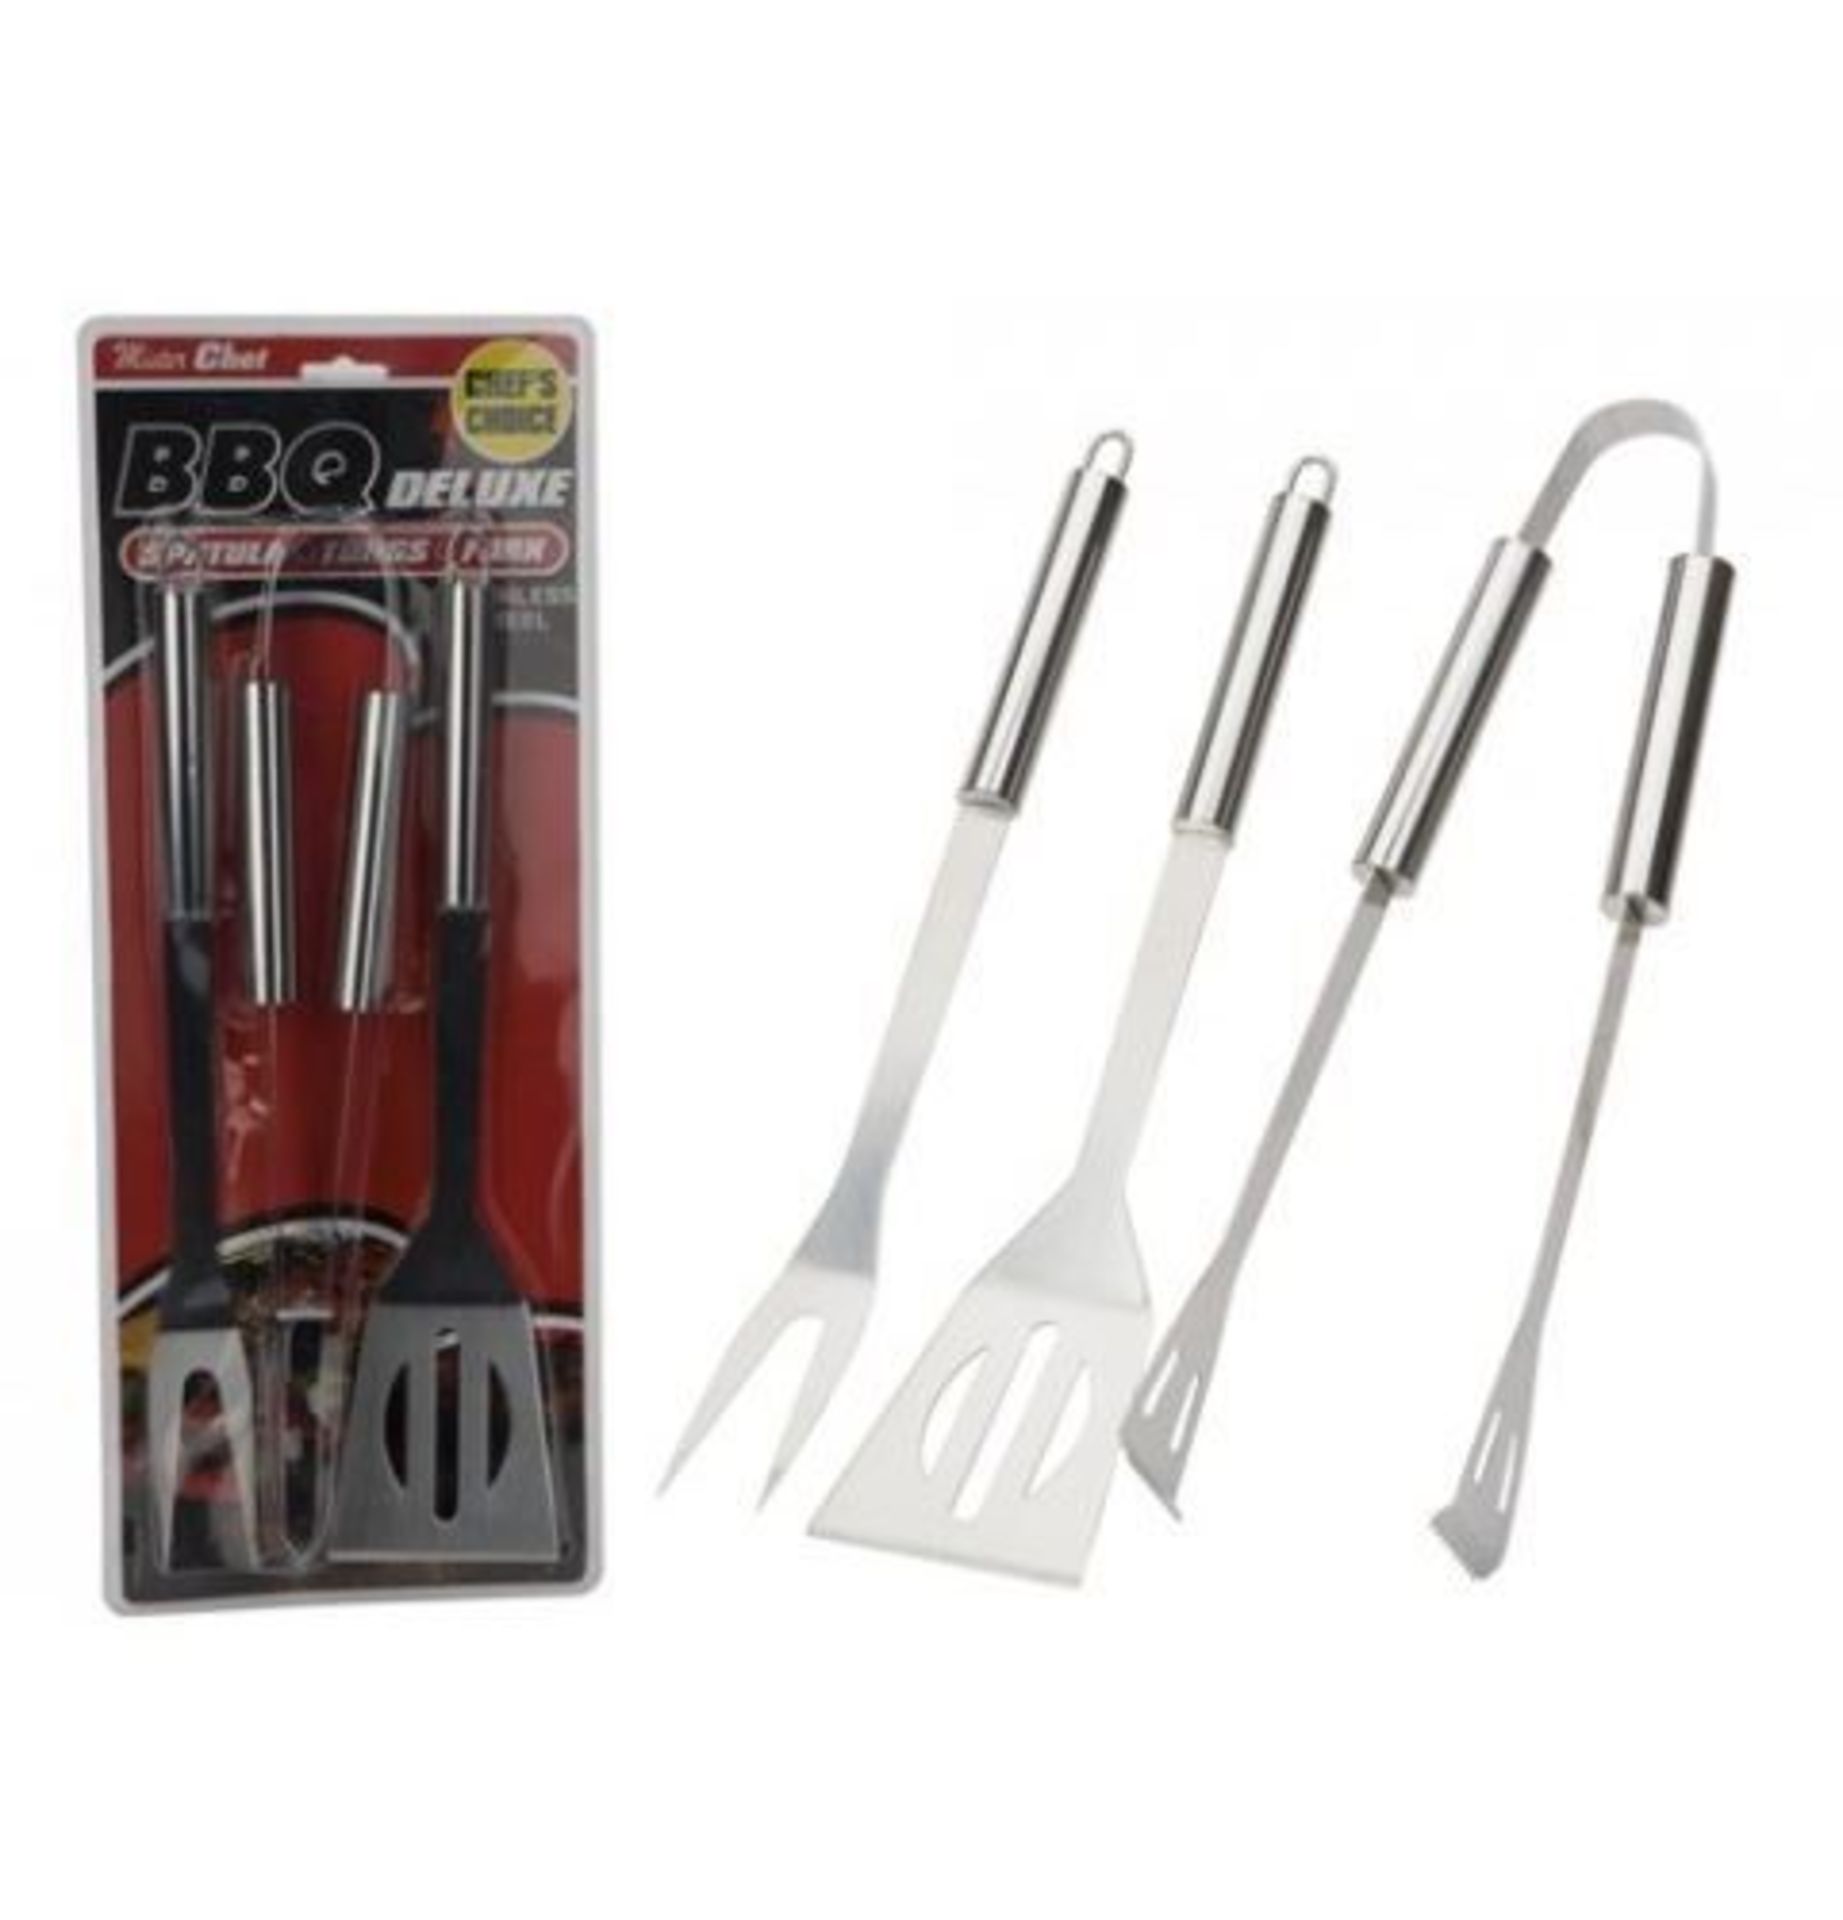 V *TRADE QTY* Brand New Stainless Steel Three Piece BBQ Tool Kit X 4 YOUR BID PRICE TO BE MULTIPLIED